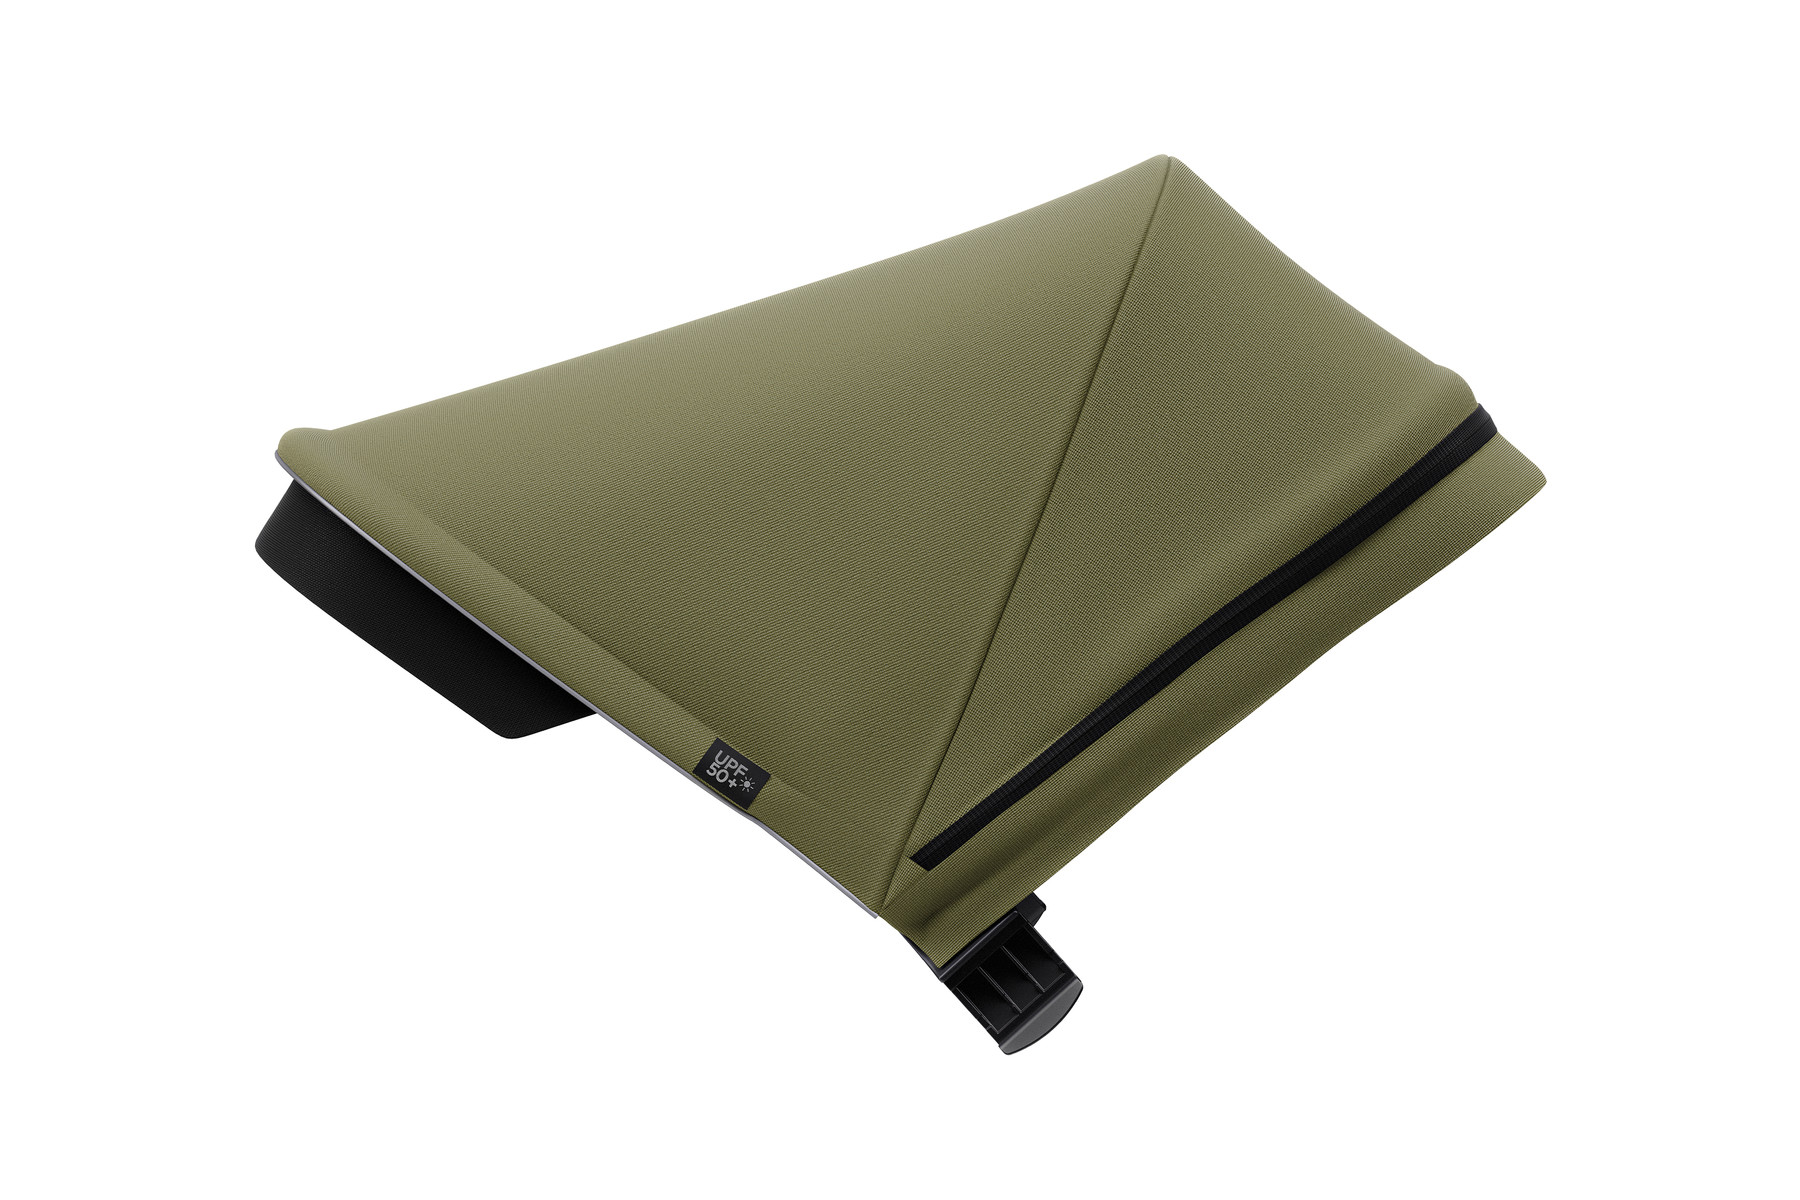 Thule Spring Canopy Olive 11300304